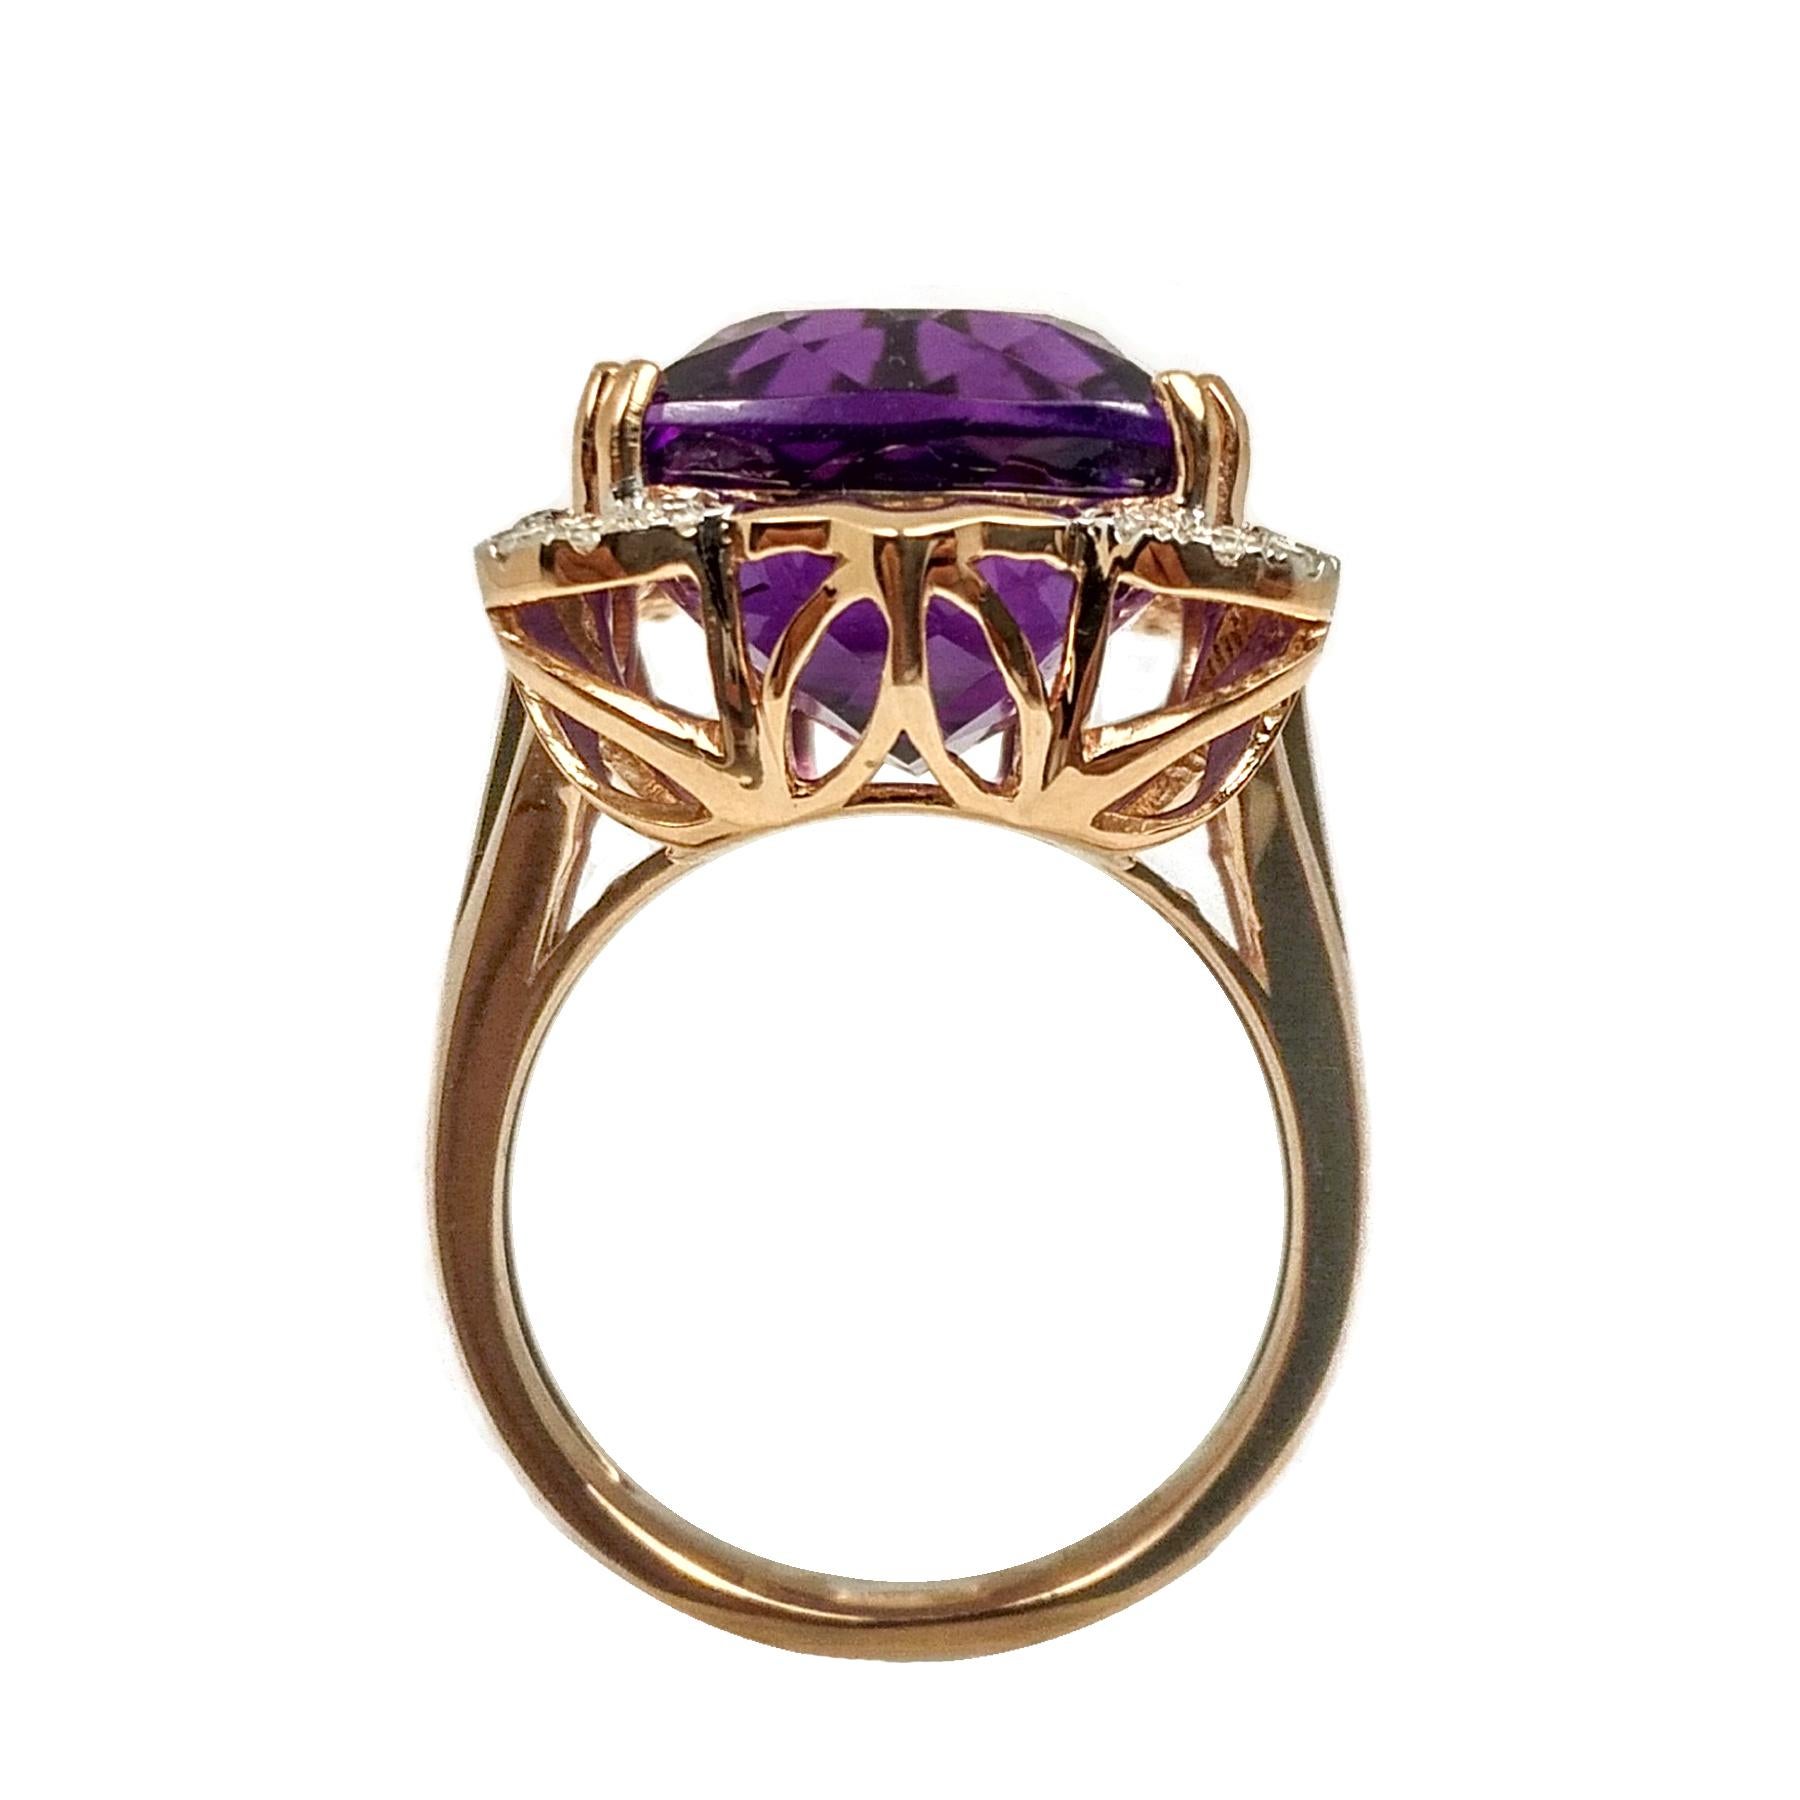 Contemporary, intense purple amethyst and diamond ring. Handcrafted high luster, cushion faceted, amethyst mounted in high profile open basket with 8 prongs, accented with round brilliant cut diamond, set in 14 karats rose gold. Statement cocktail